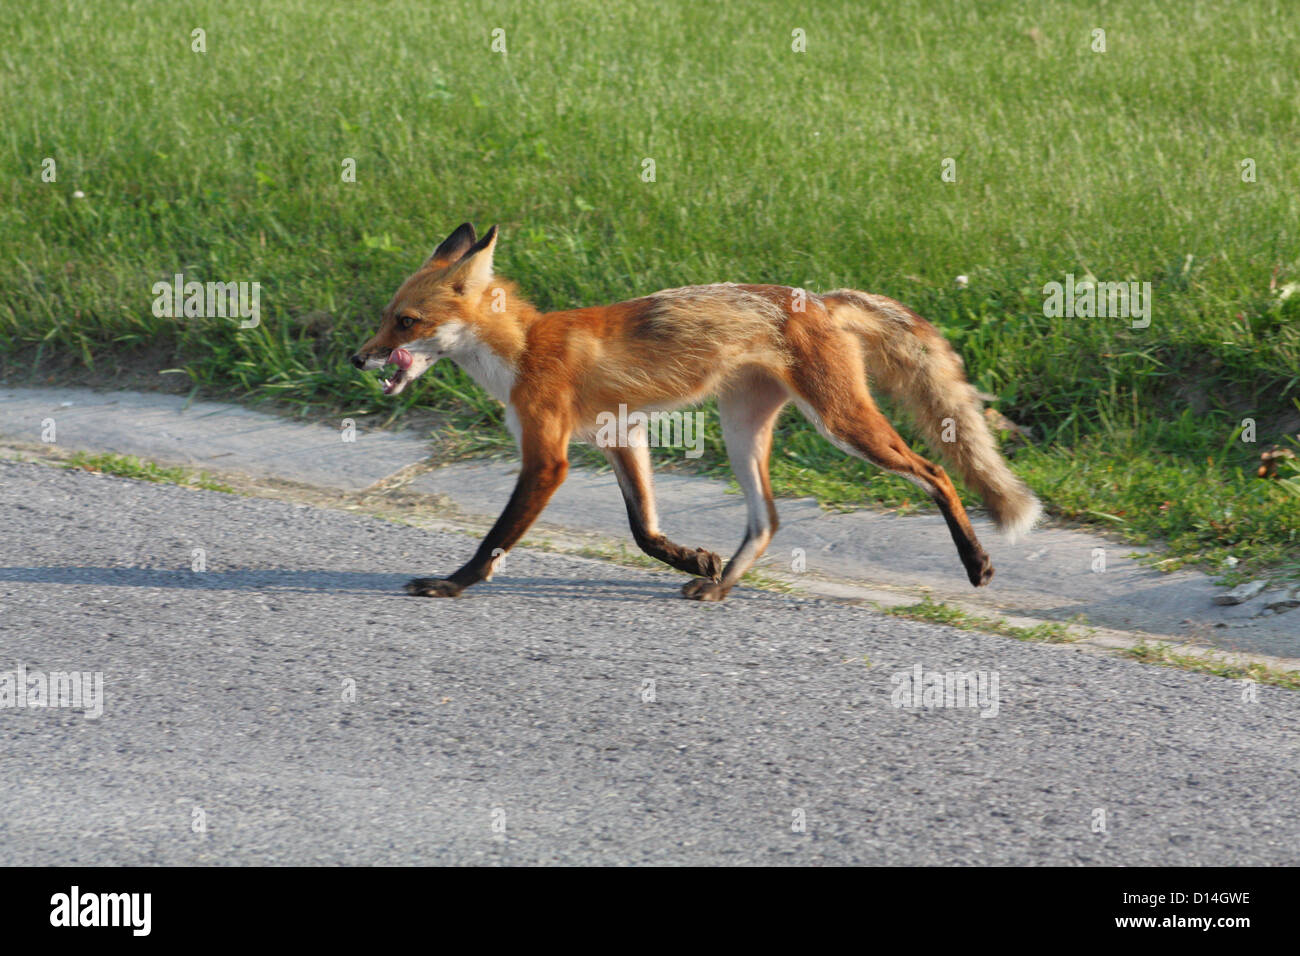 Wild Red Fox walking at the edge of a road, in a residential neighborhood. Stock Photo